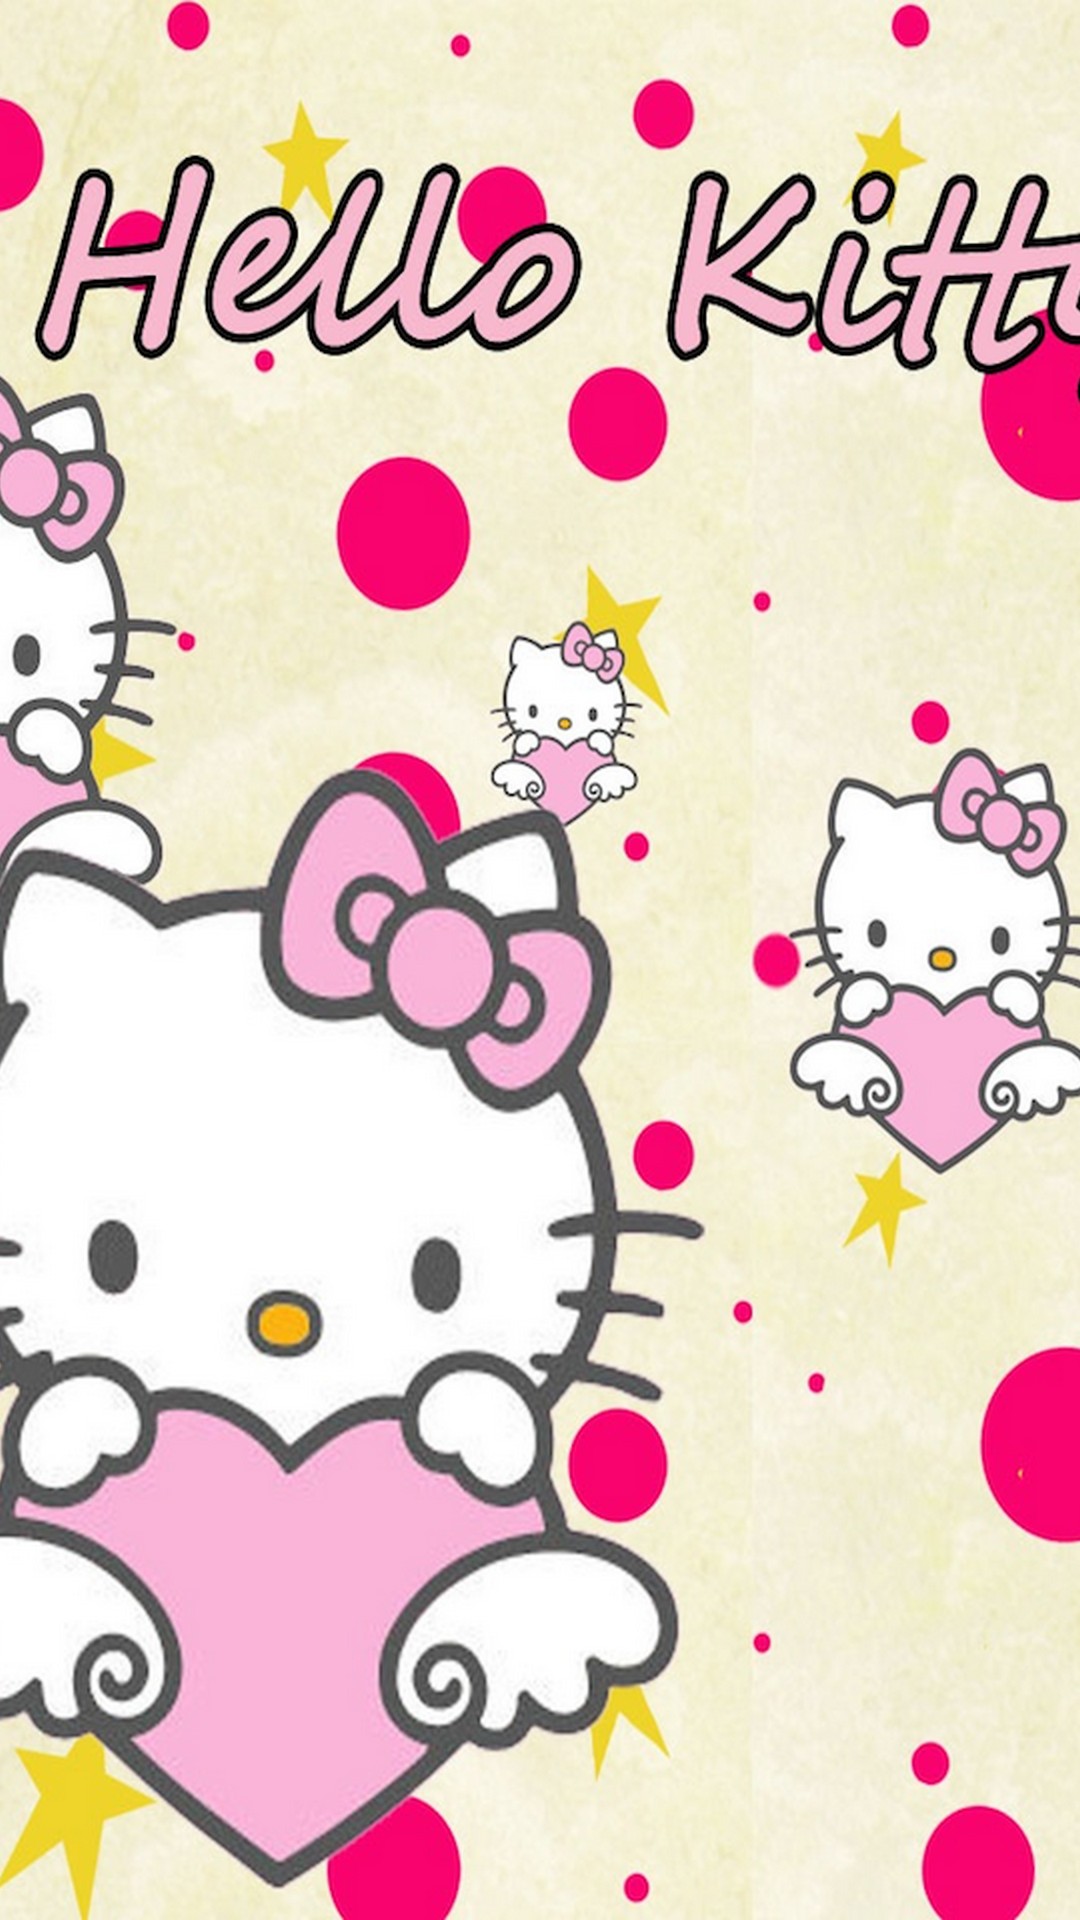 Sanrio Hello Kitty HD Wallpaper For iPhone with image resolution 1080x1920 pixel. You can use this wallpaper as background for your desktop Computer Screensavers, Android or iPhone smartphones